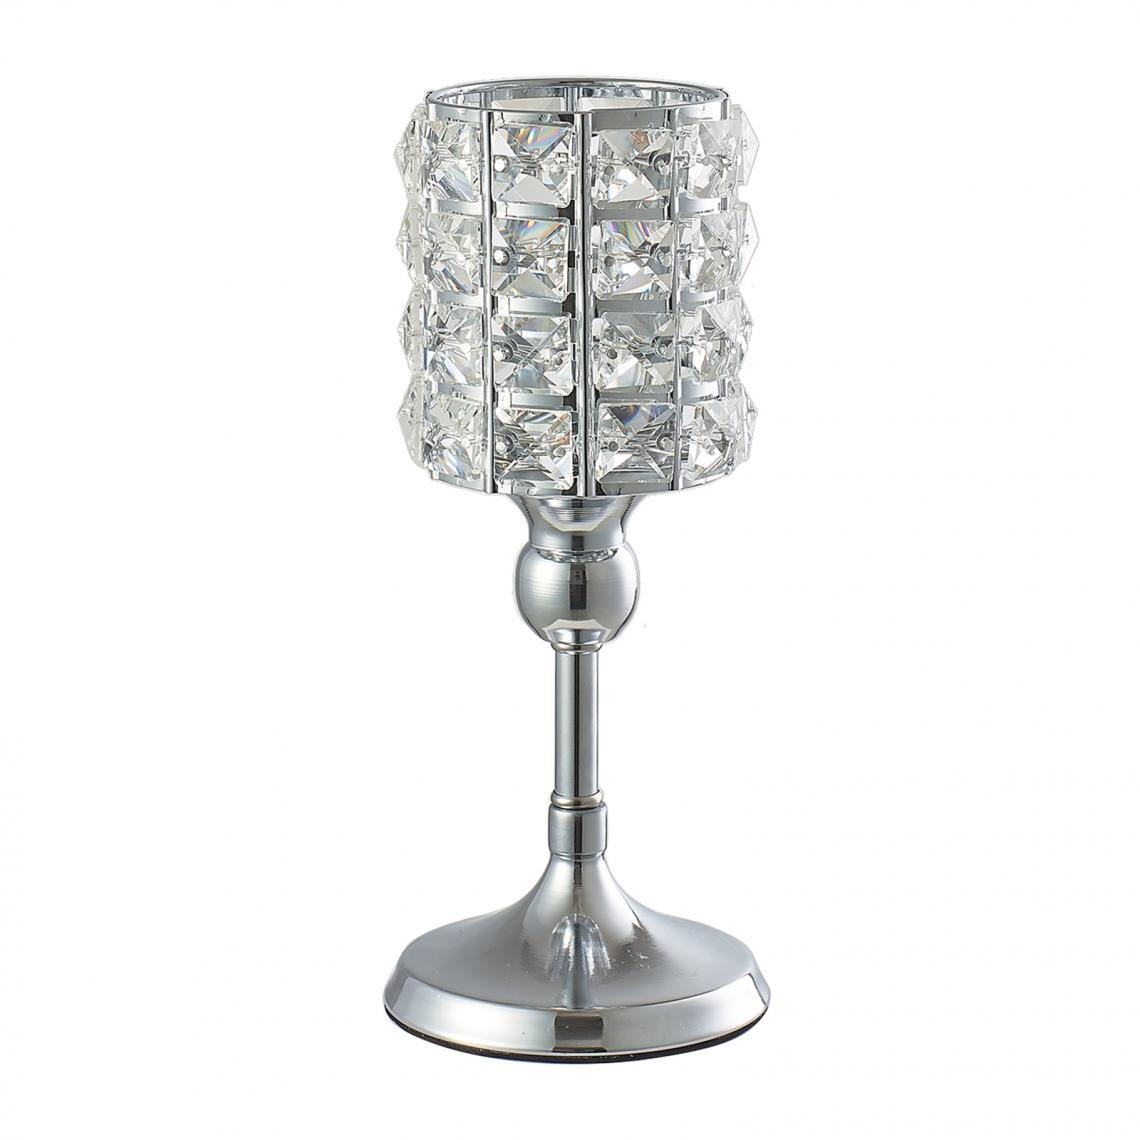 marque generique - Bougeoirs En Cristal Moderne Stand Chandelier Bougeoir 11x41cm - Bougeoirs, chandeliers